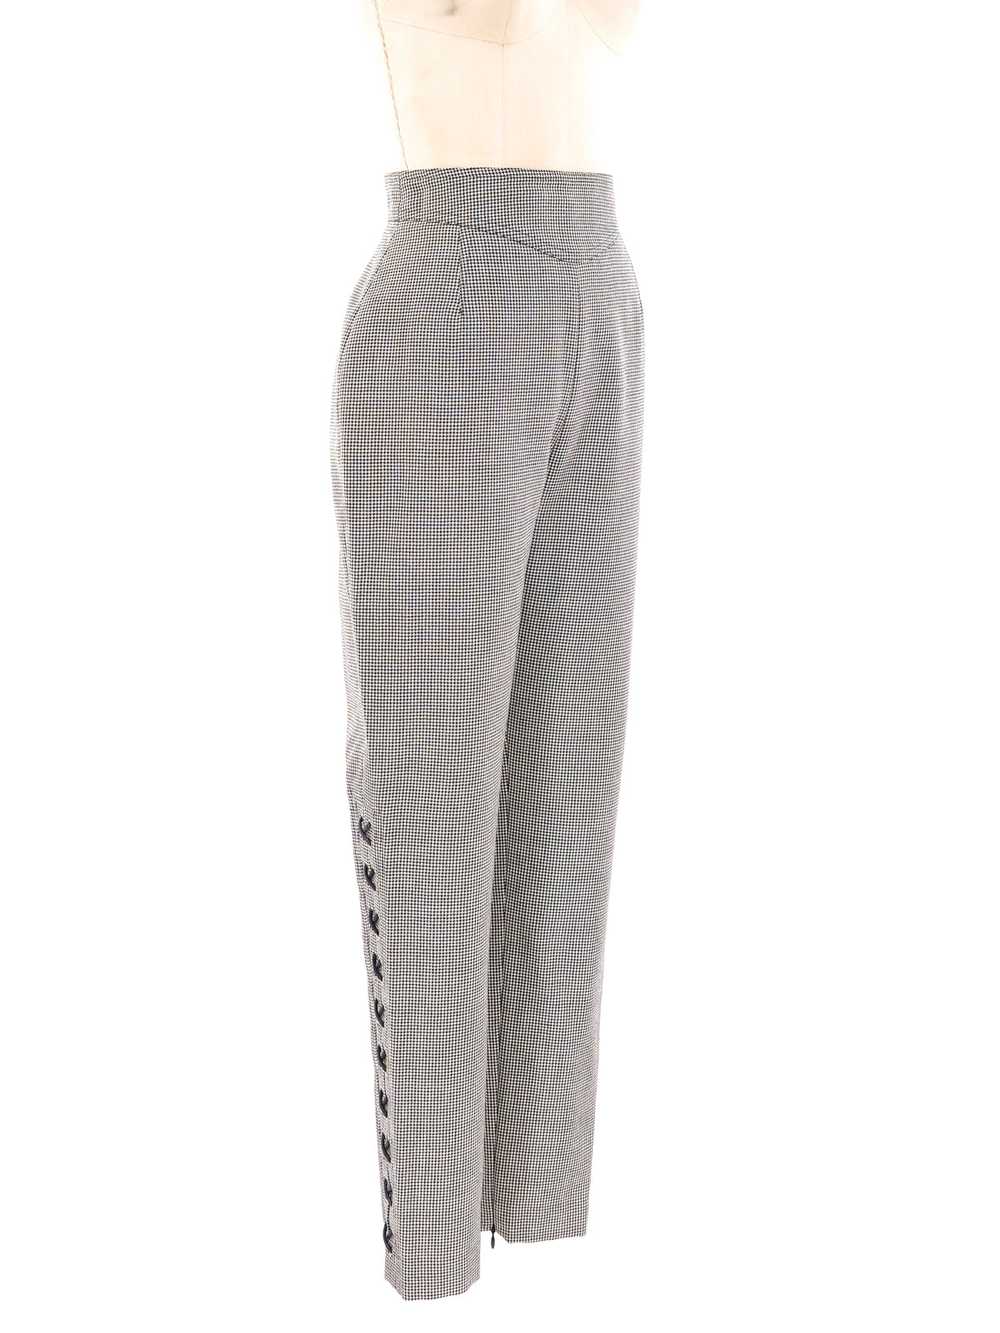 Thierry Mugler Lace Up Trousers - image 2